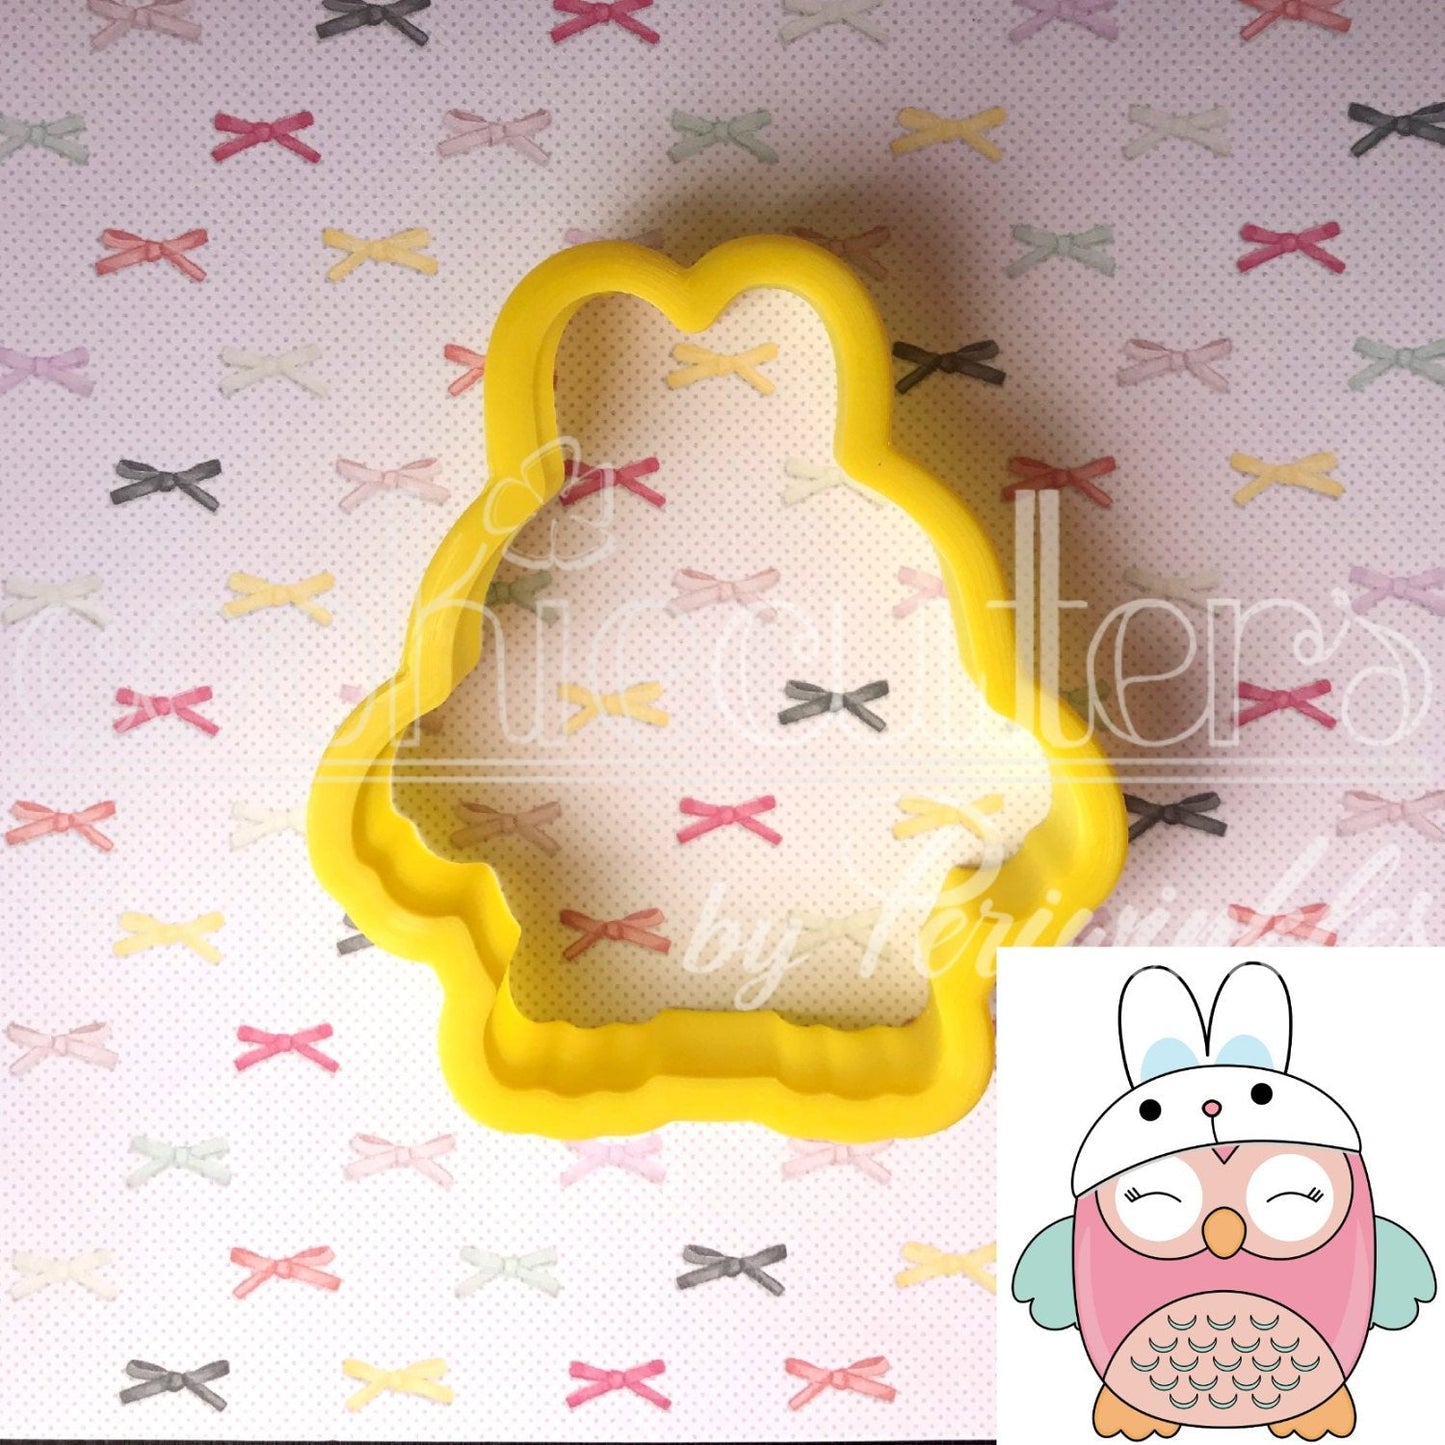 Bunny Owl Cookie Cutter - Periwinkles Cutters